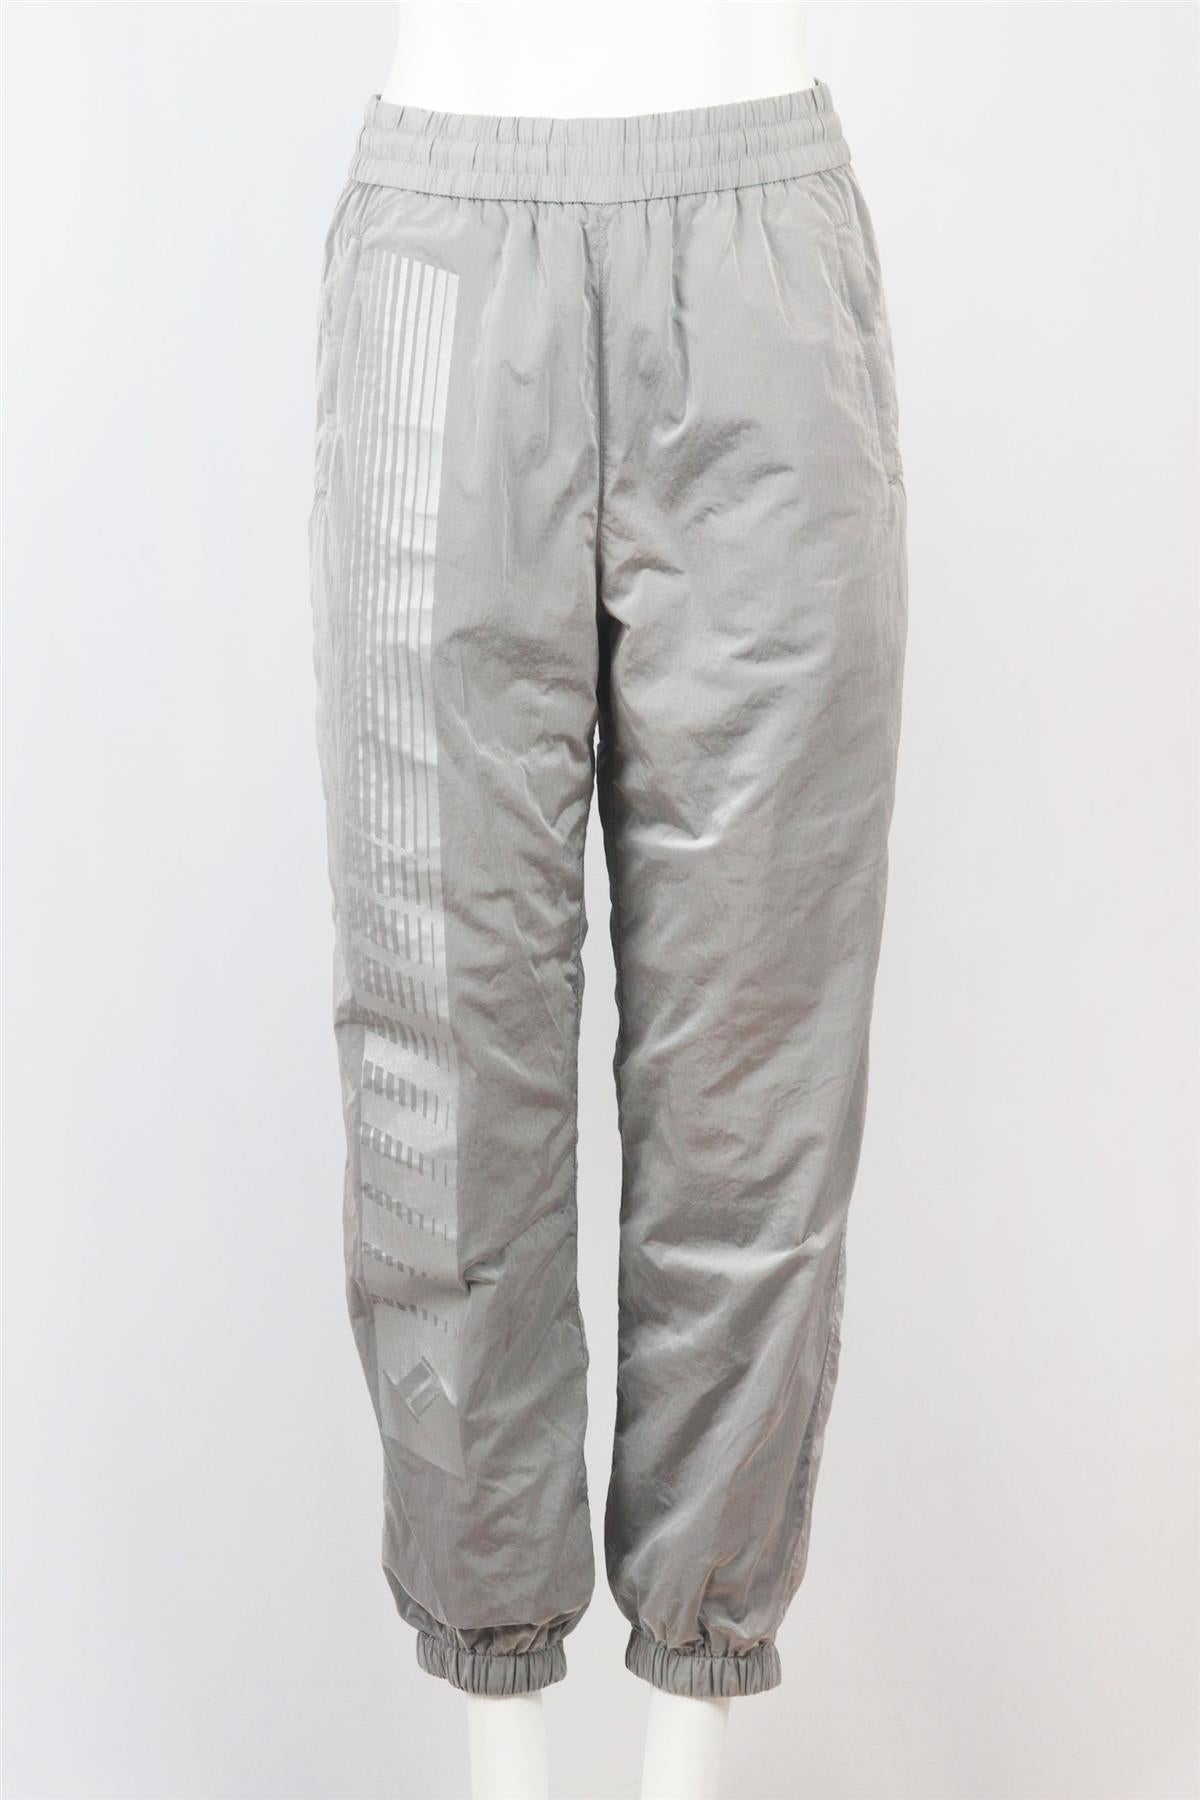 T BY ALEXANDER WANG STRIPED SHELL TRACK PANTS XSMALL